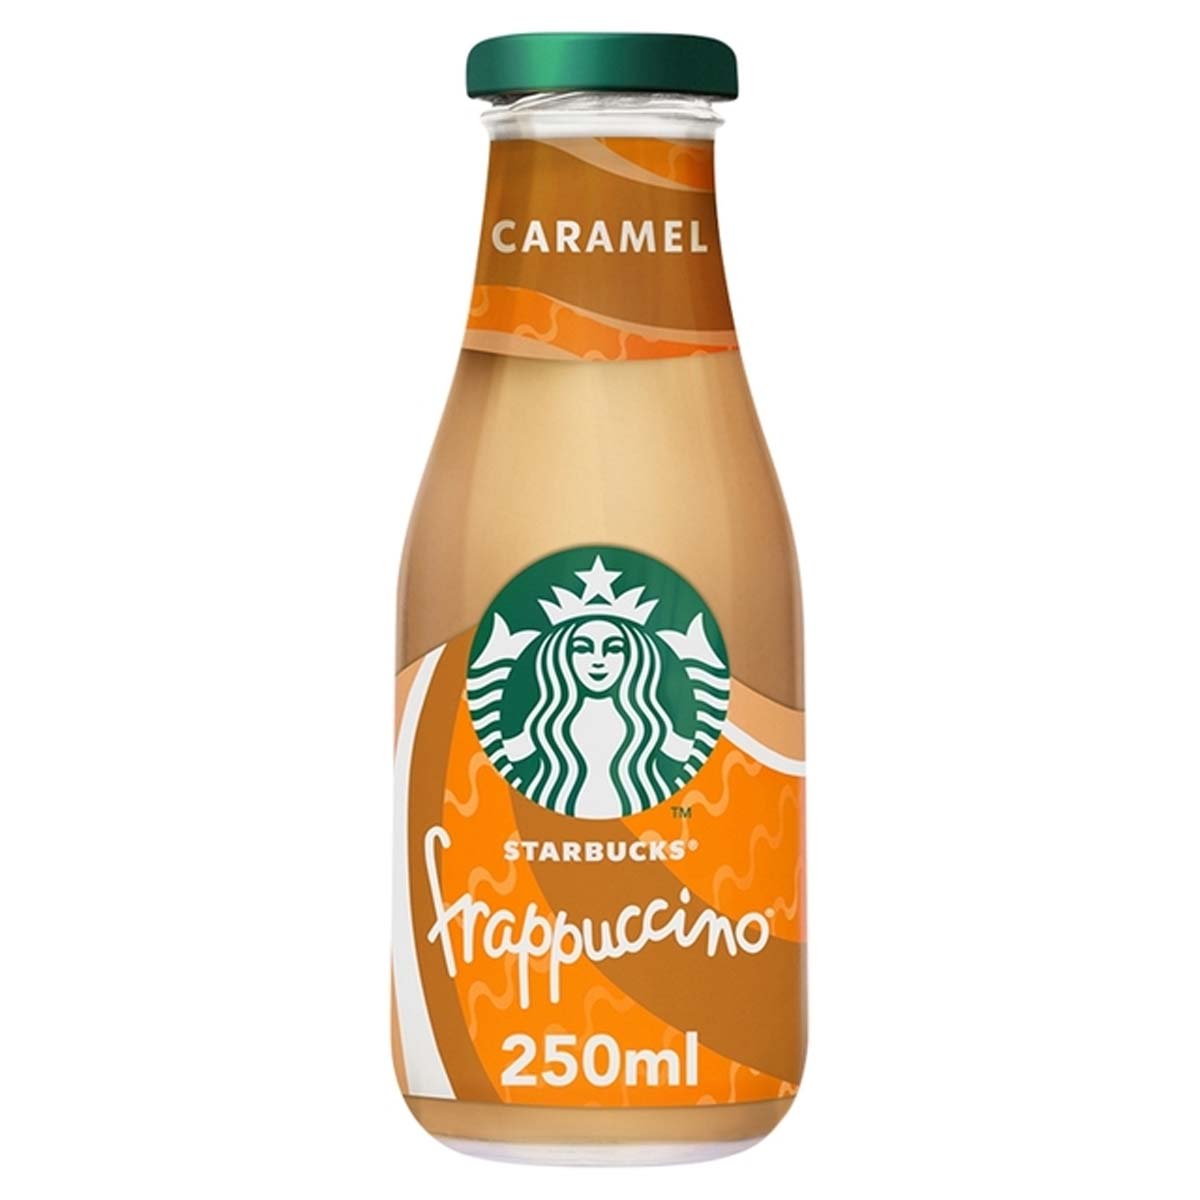 Starbucks - Frappuccino Caramel Flavoured Milk Iced Coffee - 250ml - Continental Food Store